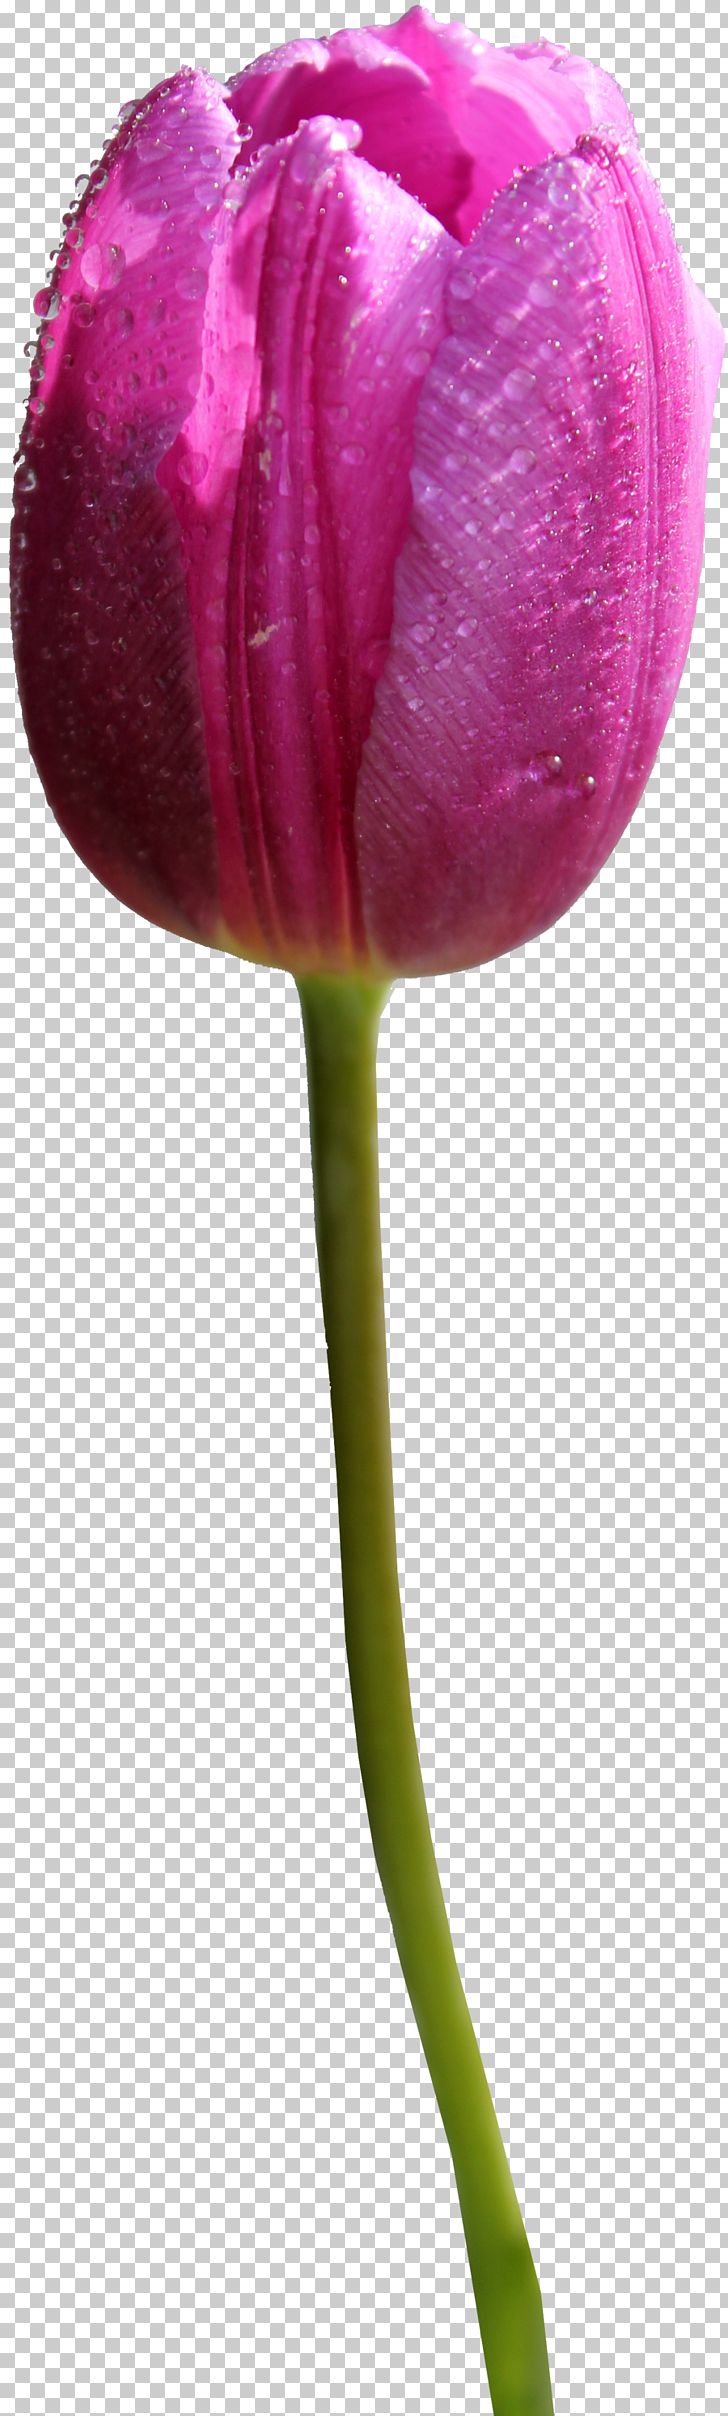 Skagit Valley Tulip Festival PNG, Clipart, Animals, Beautiful, Bild, Bud, Clouds Free PNG Download